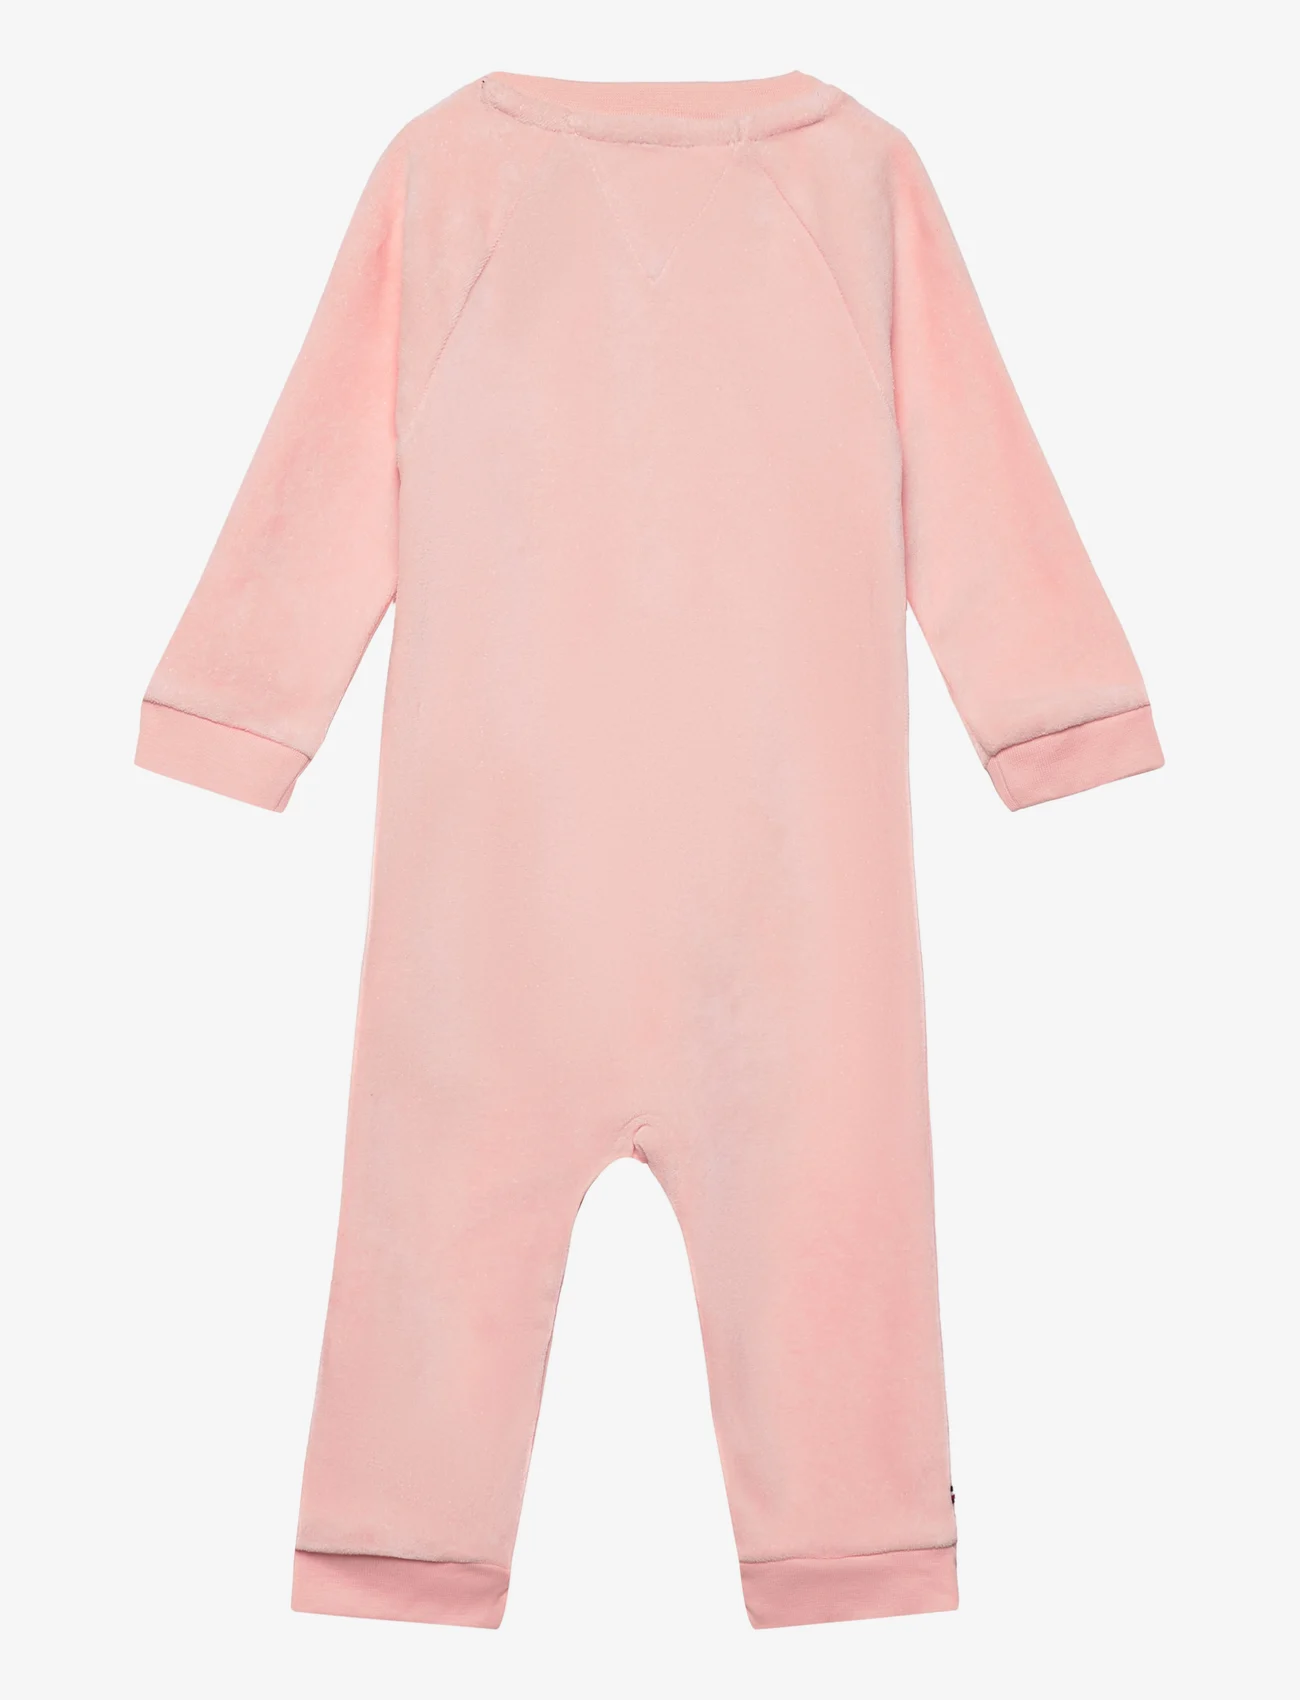 Tommy Hilfiger - BABY CURVED MONOTYPE COVERALL - långärmade - pink crystal - 1